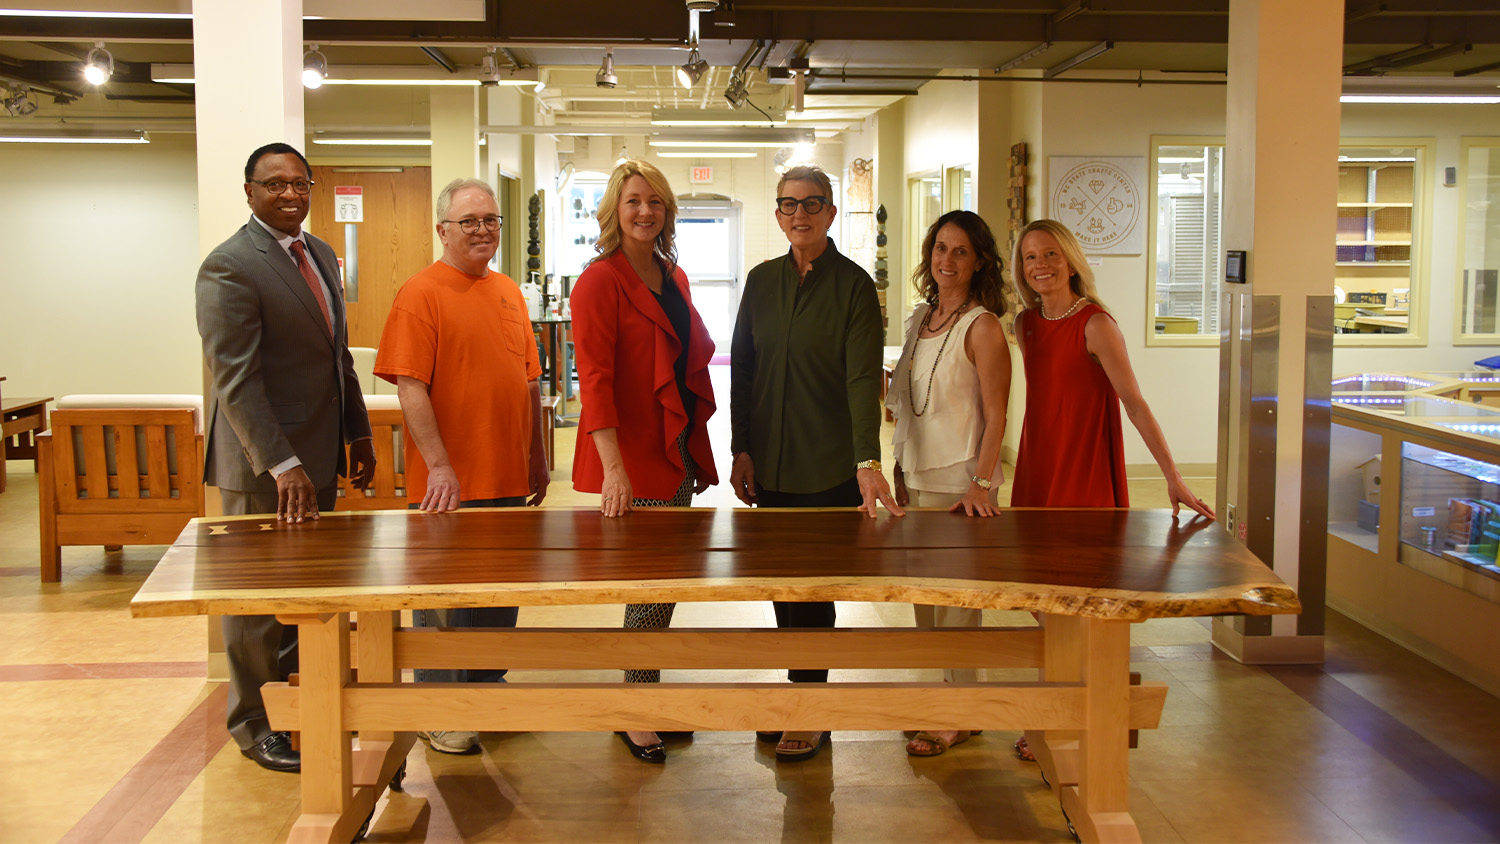 A group of people behind a hand-carved wooden table, positioned in the center of the Crafts Center lobby